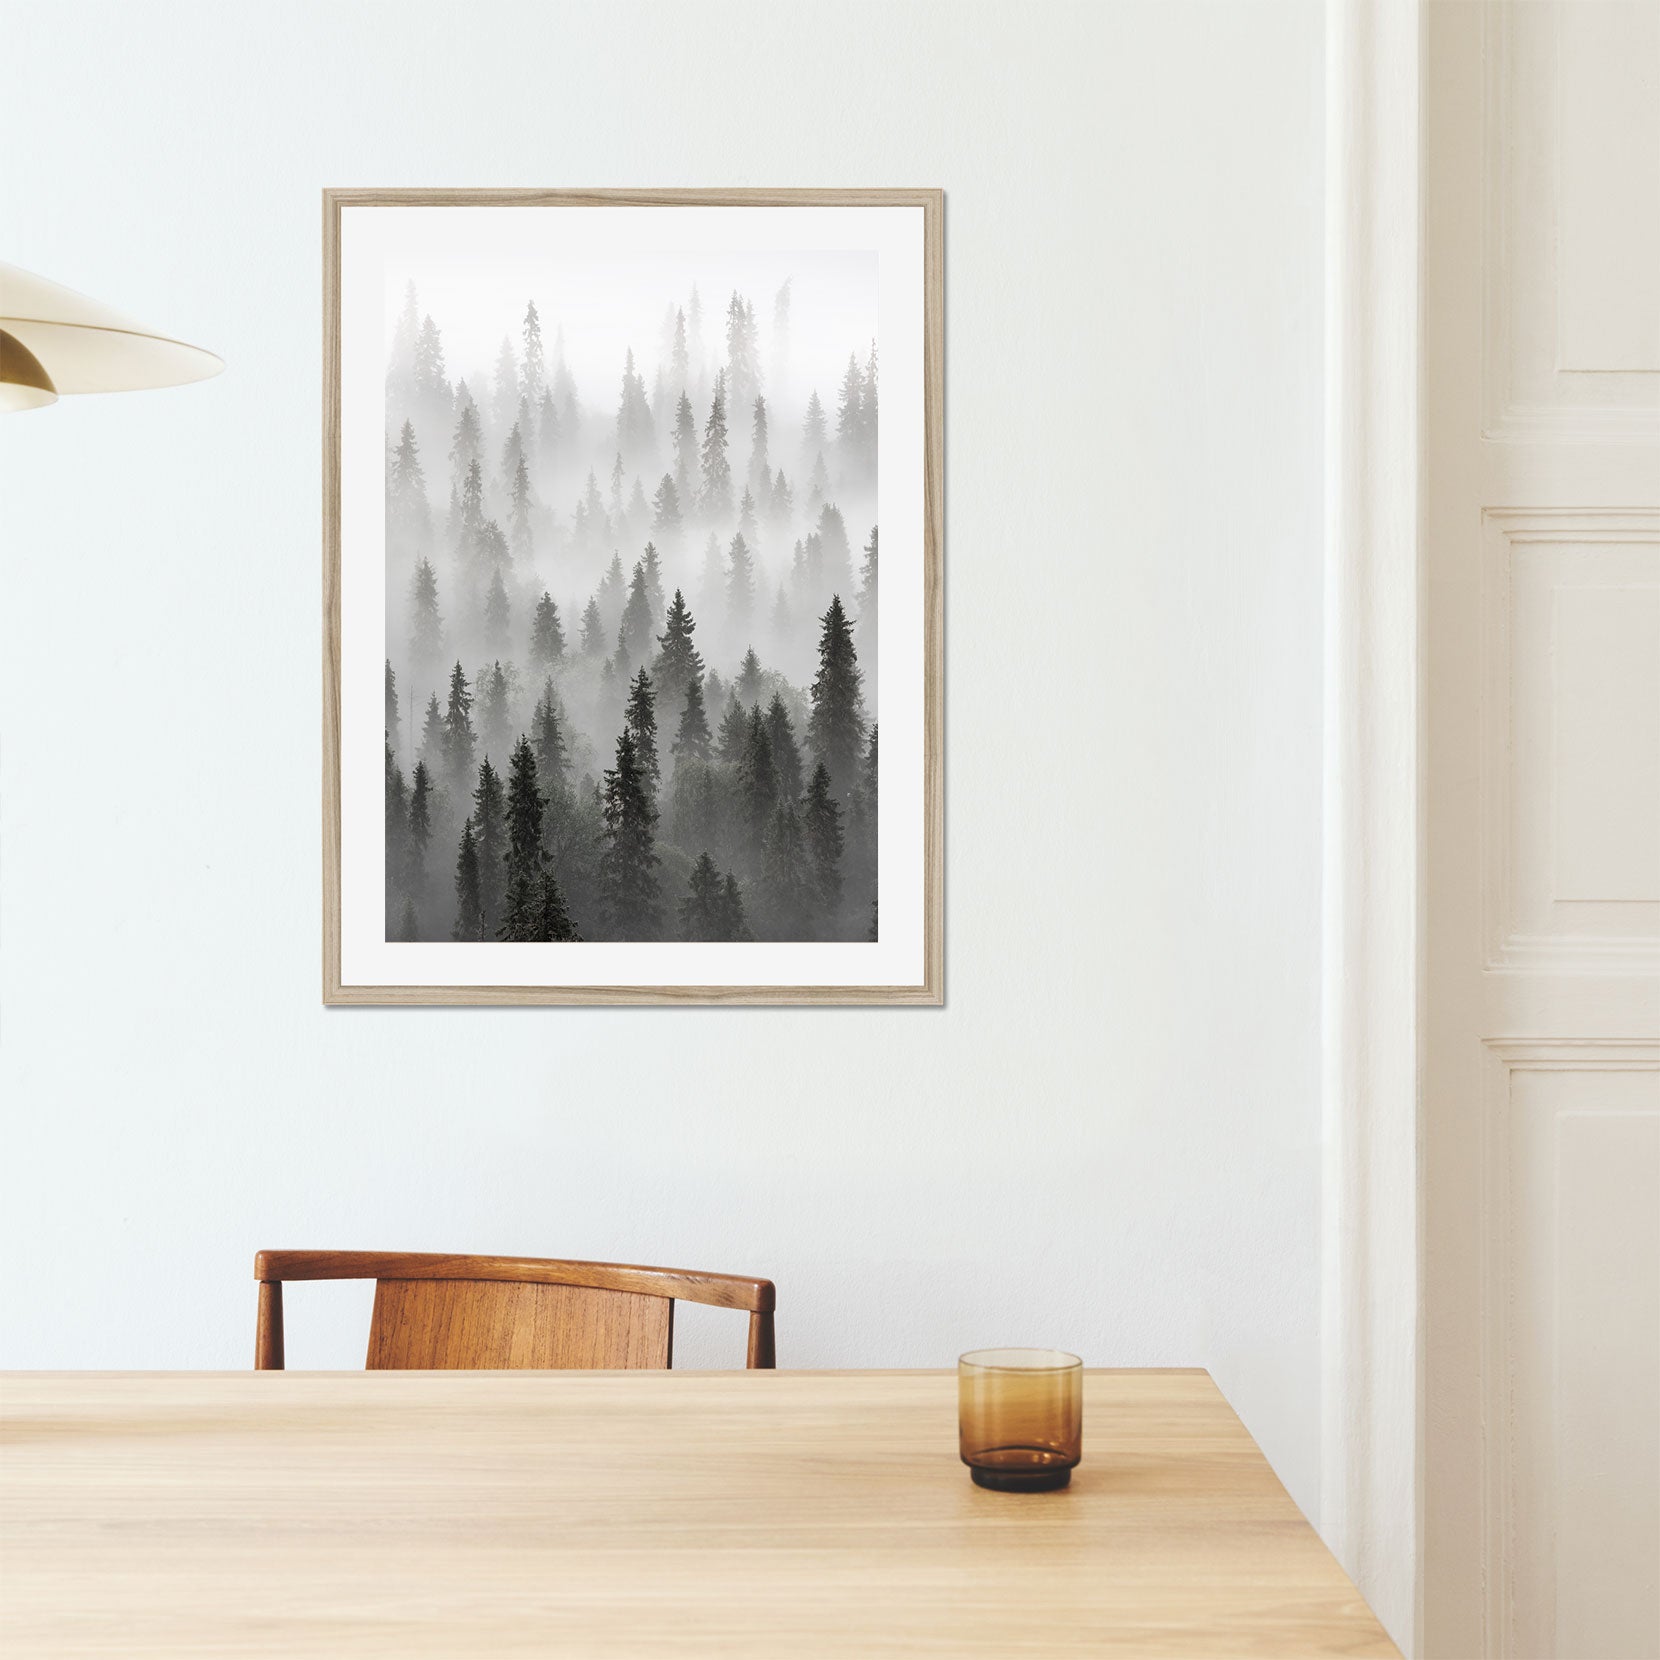 A framed print of a forest with lingering fog